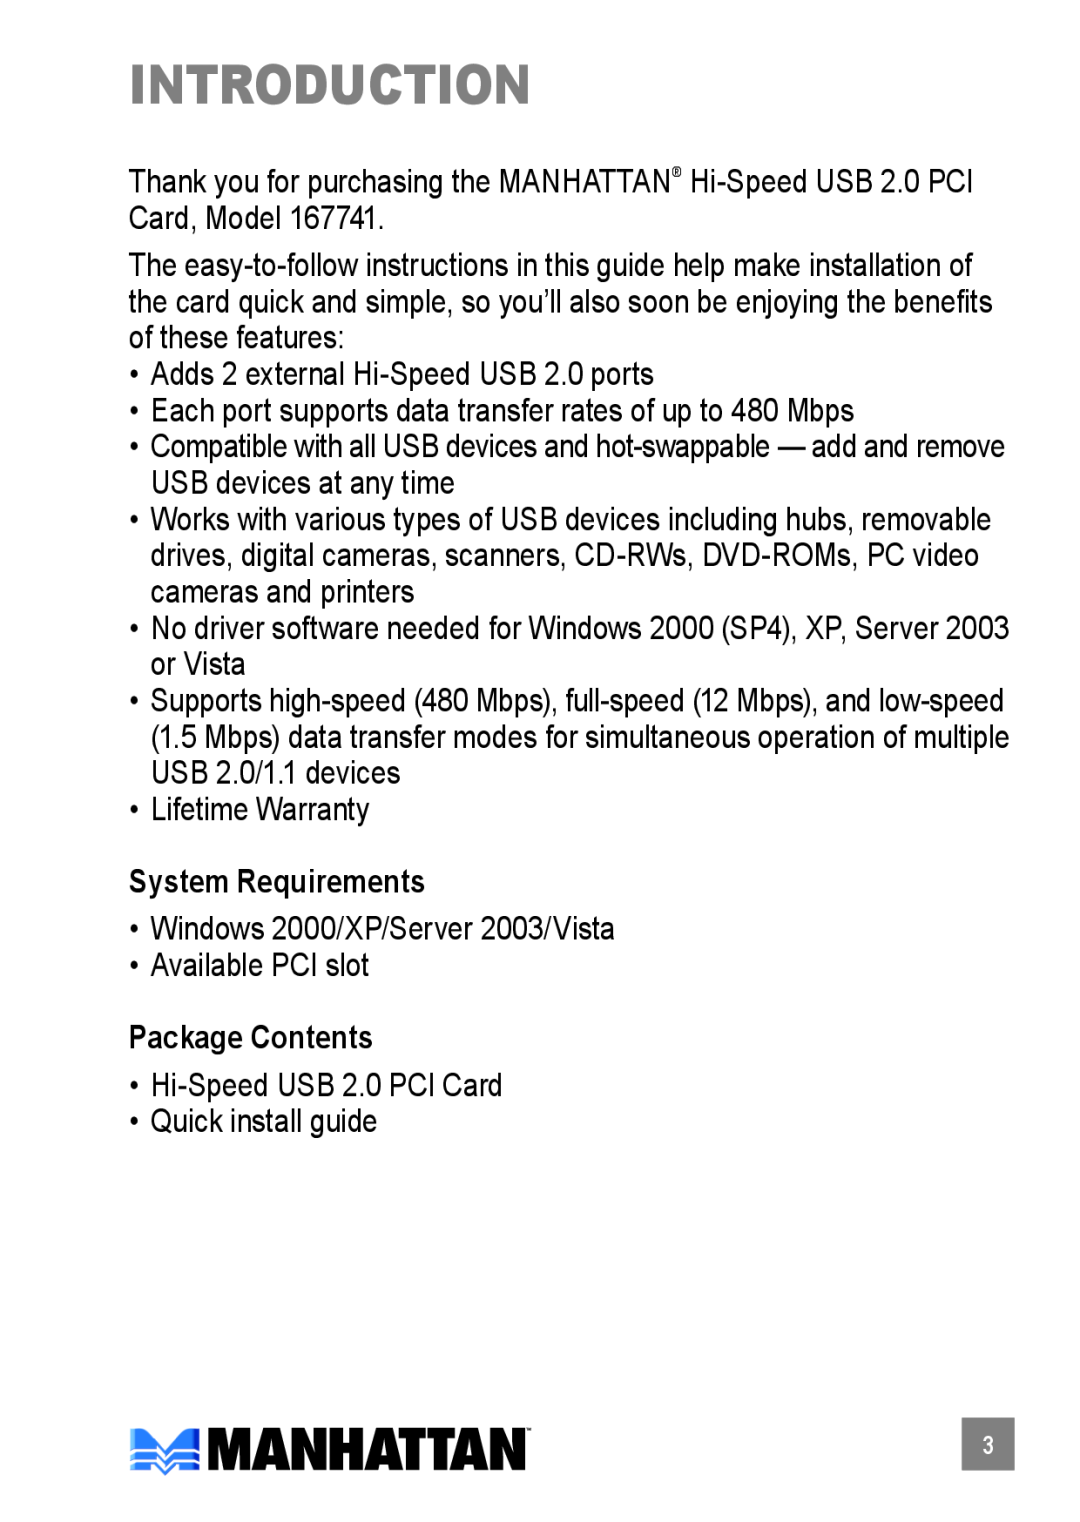 Manhattan Computer Products 167741 manual introduction, System Requirements, Package Contents 